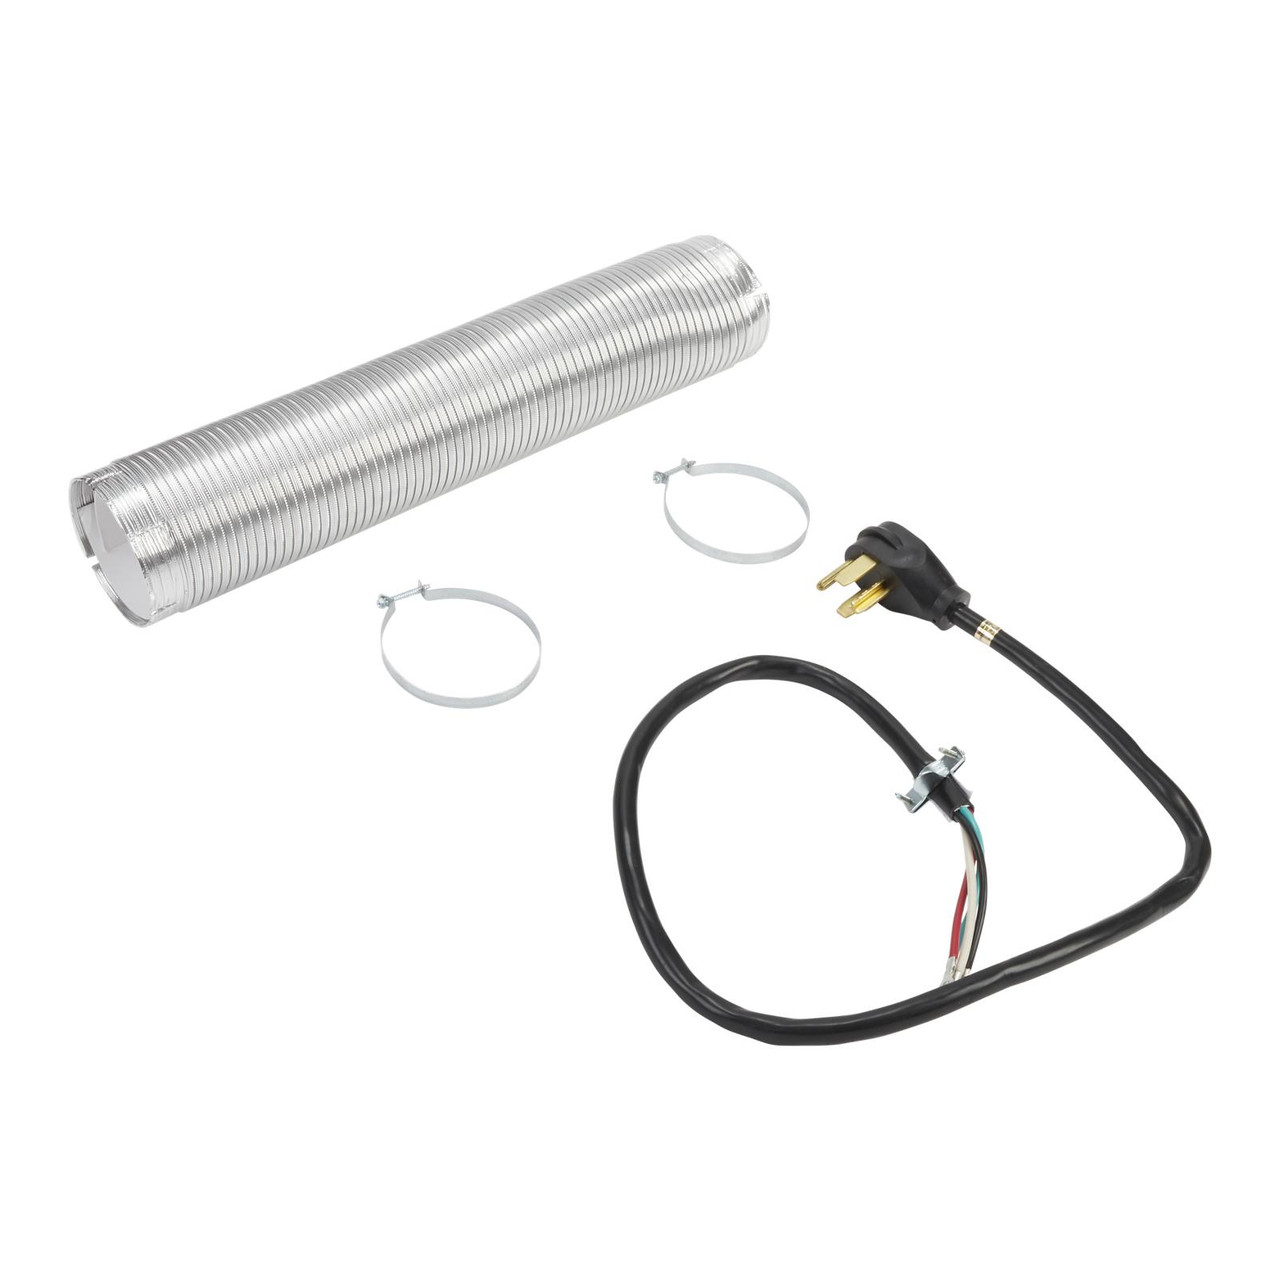 Whirlpool W10182830RB - Electric Dryer Vent Kit